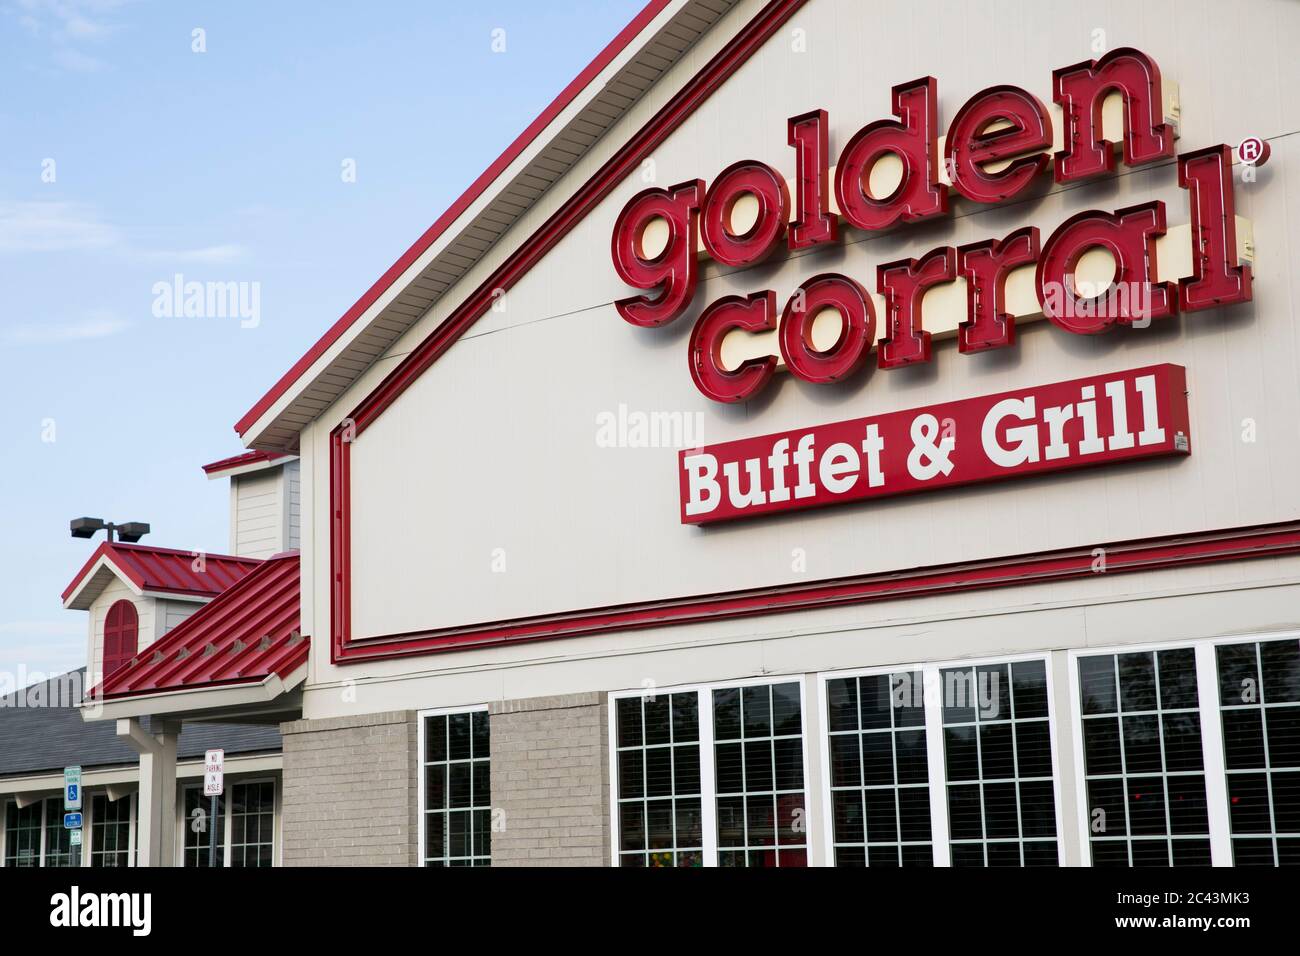 A logo sign outside of a Golden Corral Buffet & Grill location in Hagerstown, Maryland on June 10, 2020. Stock Photo